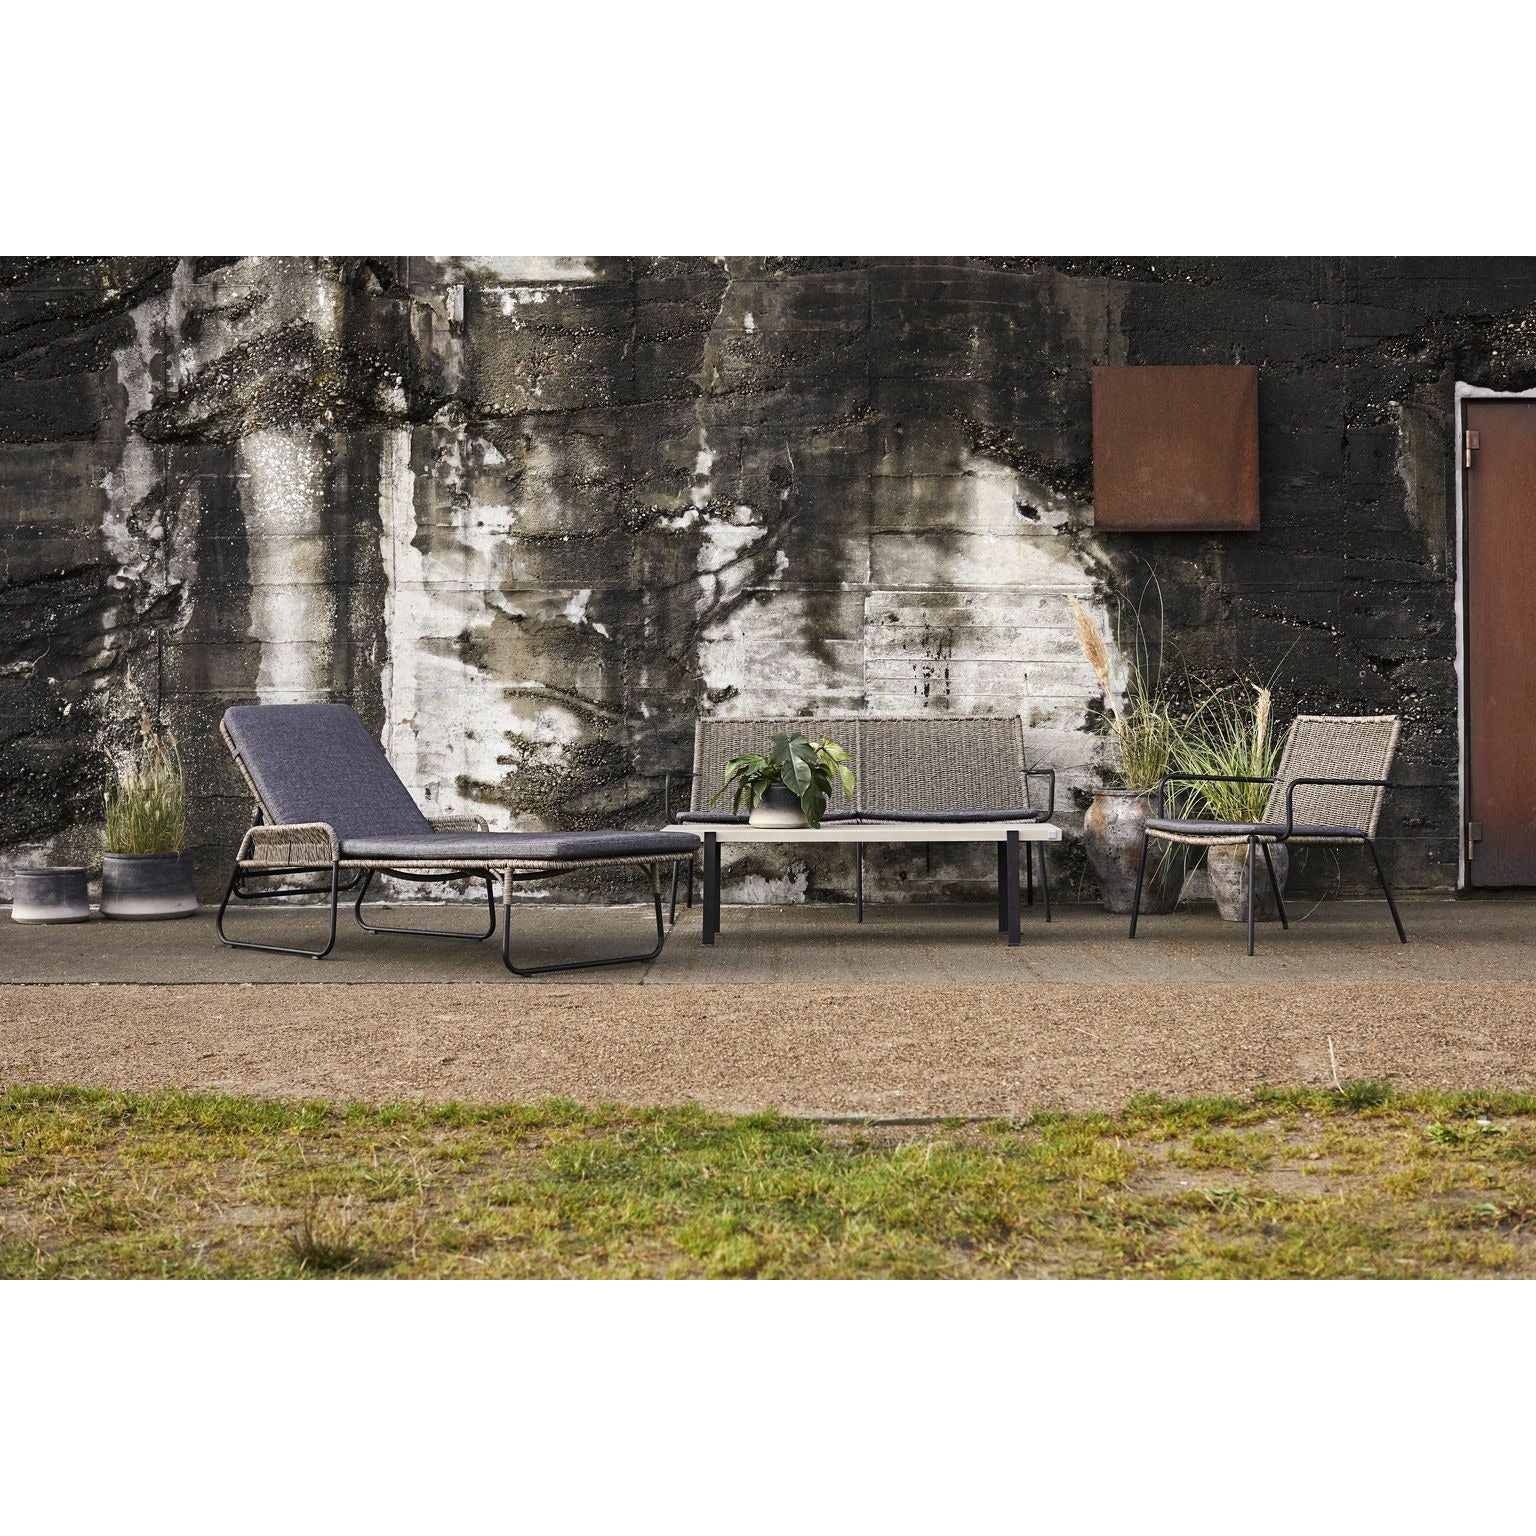 Muubs Riva Sofa, 2 Persons